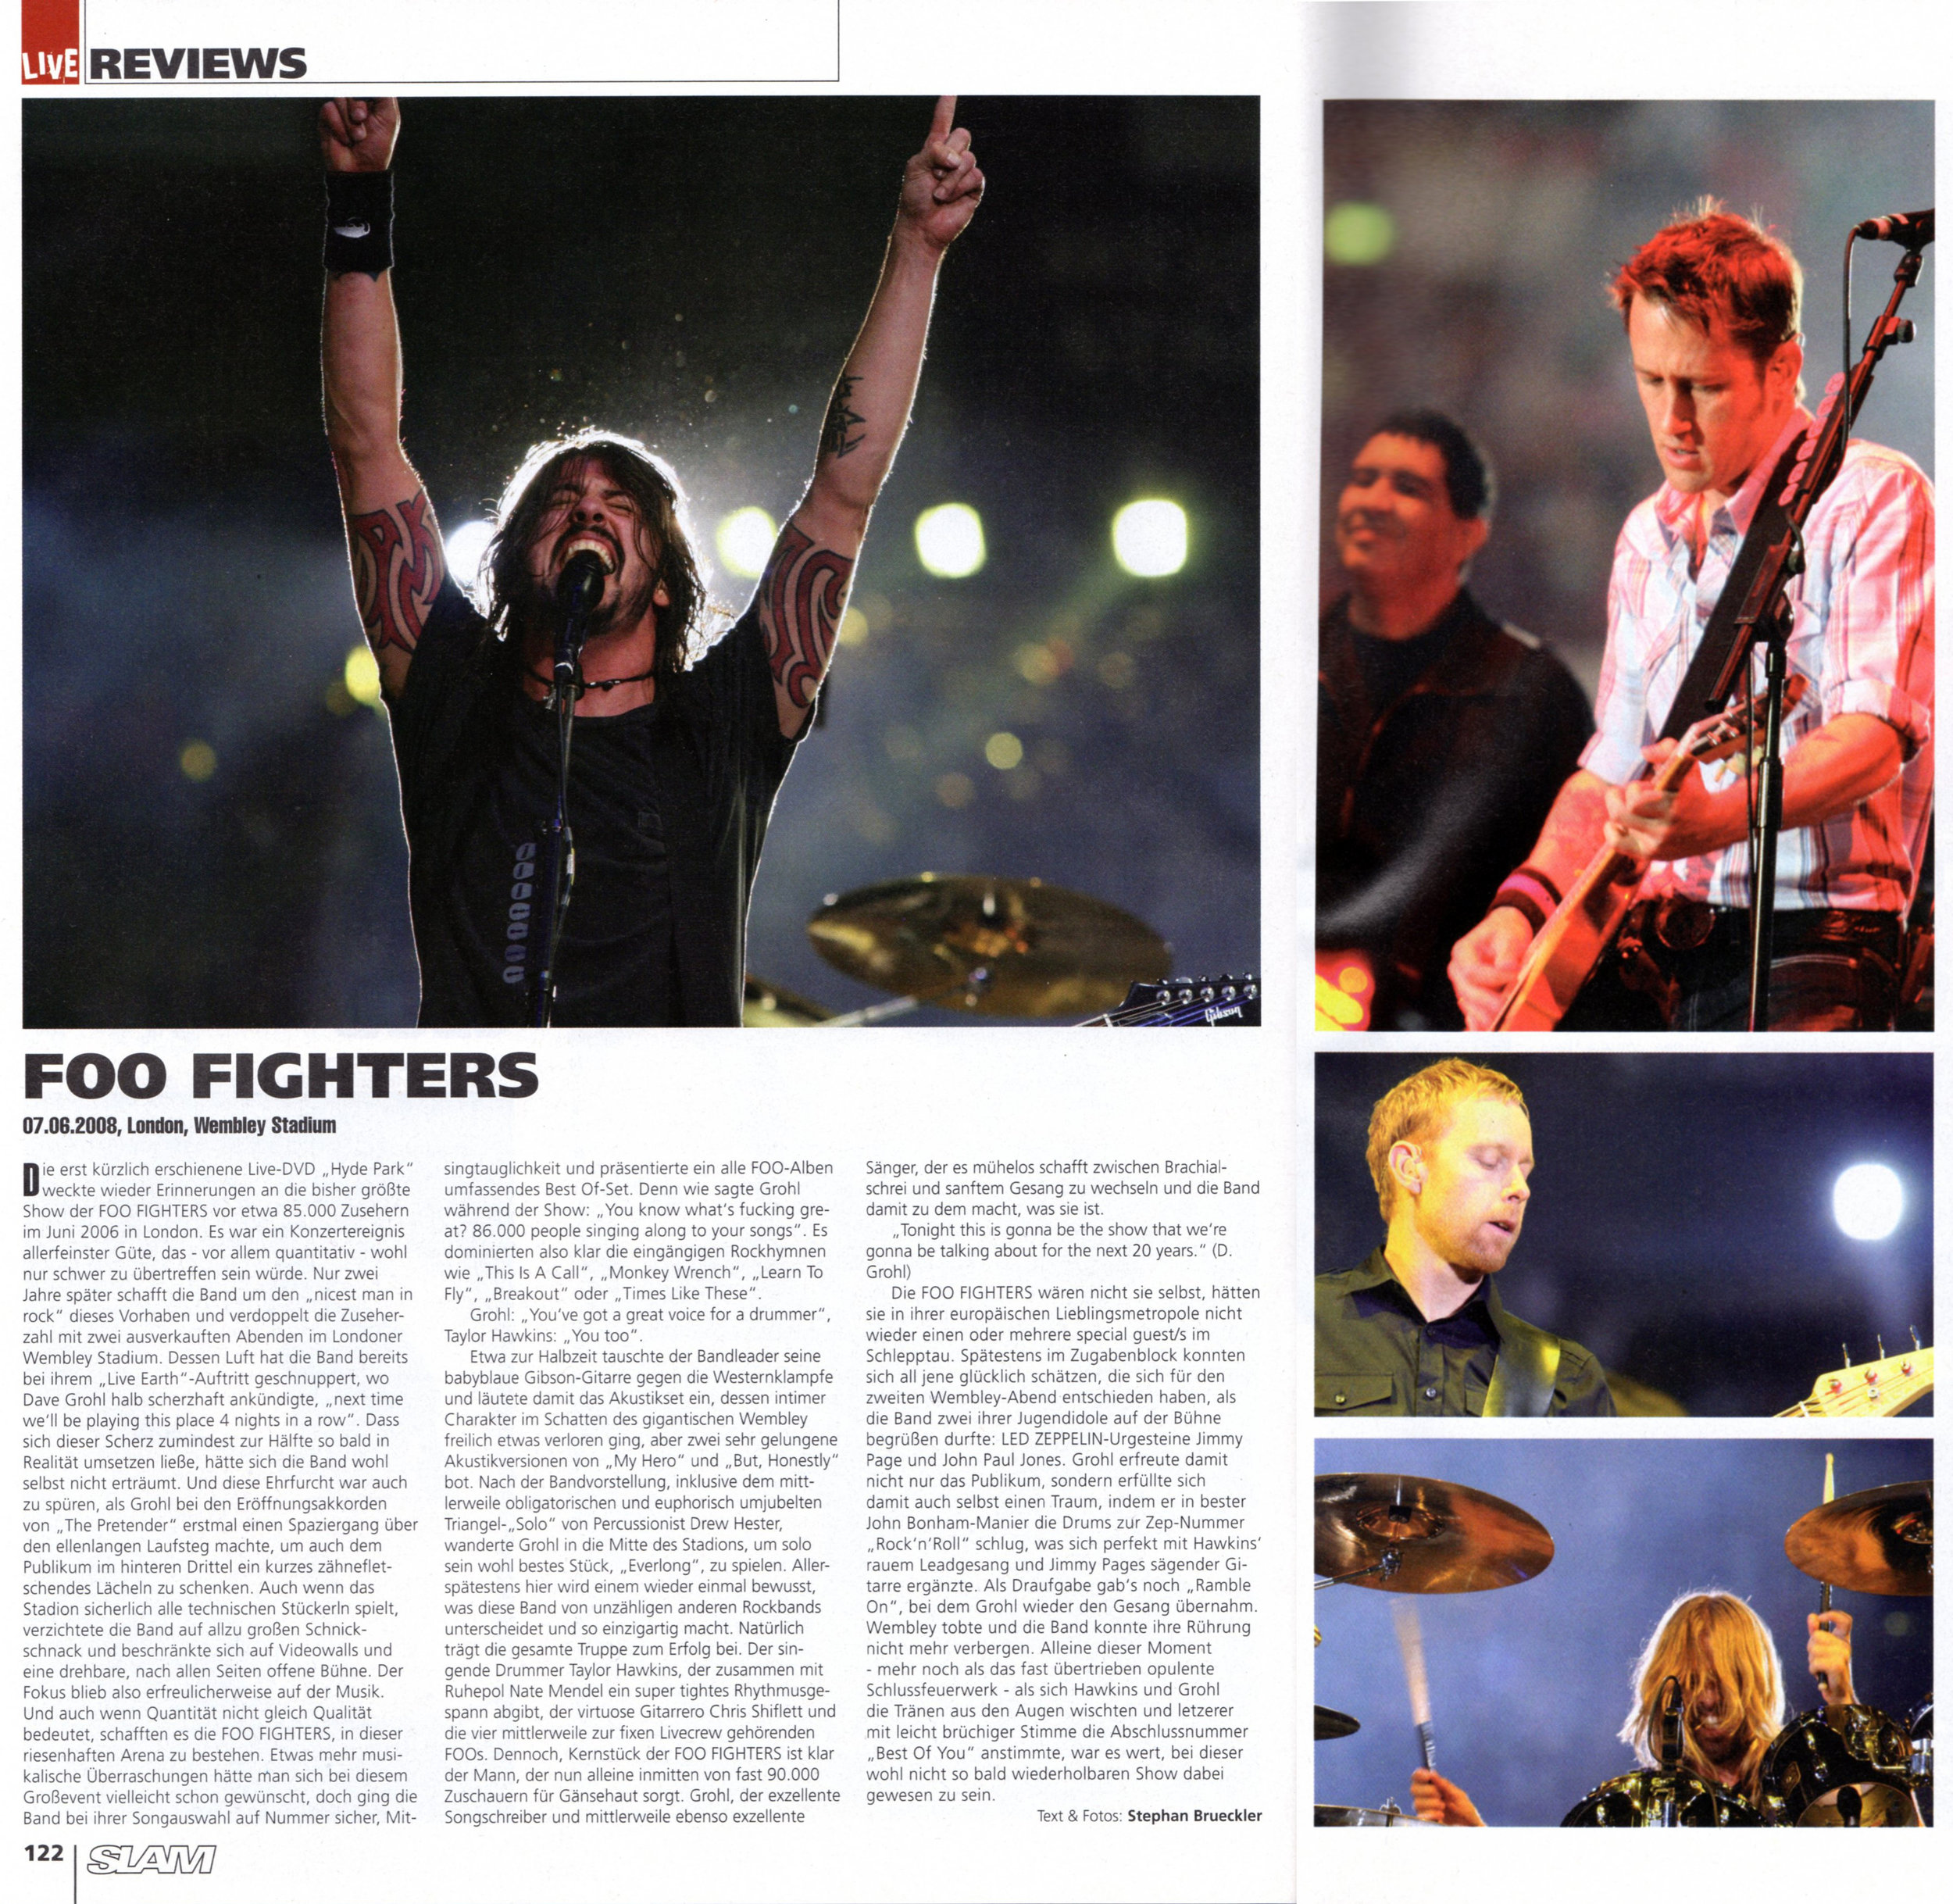 FOO FIGHTERS live in London/Wembley Stadium, 2008